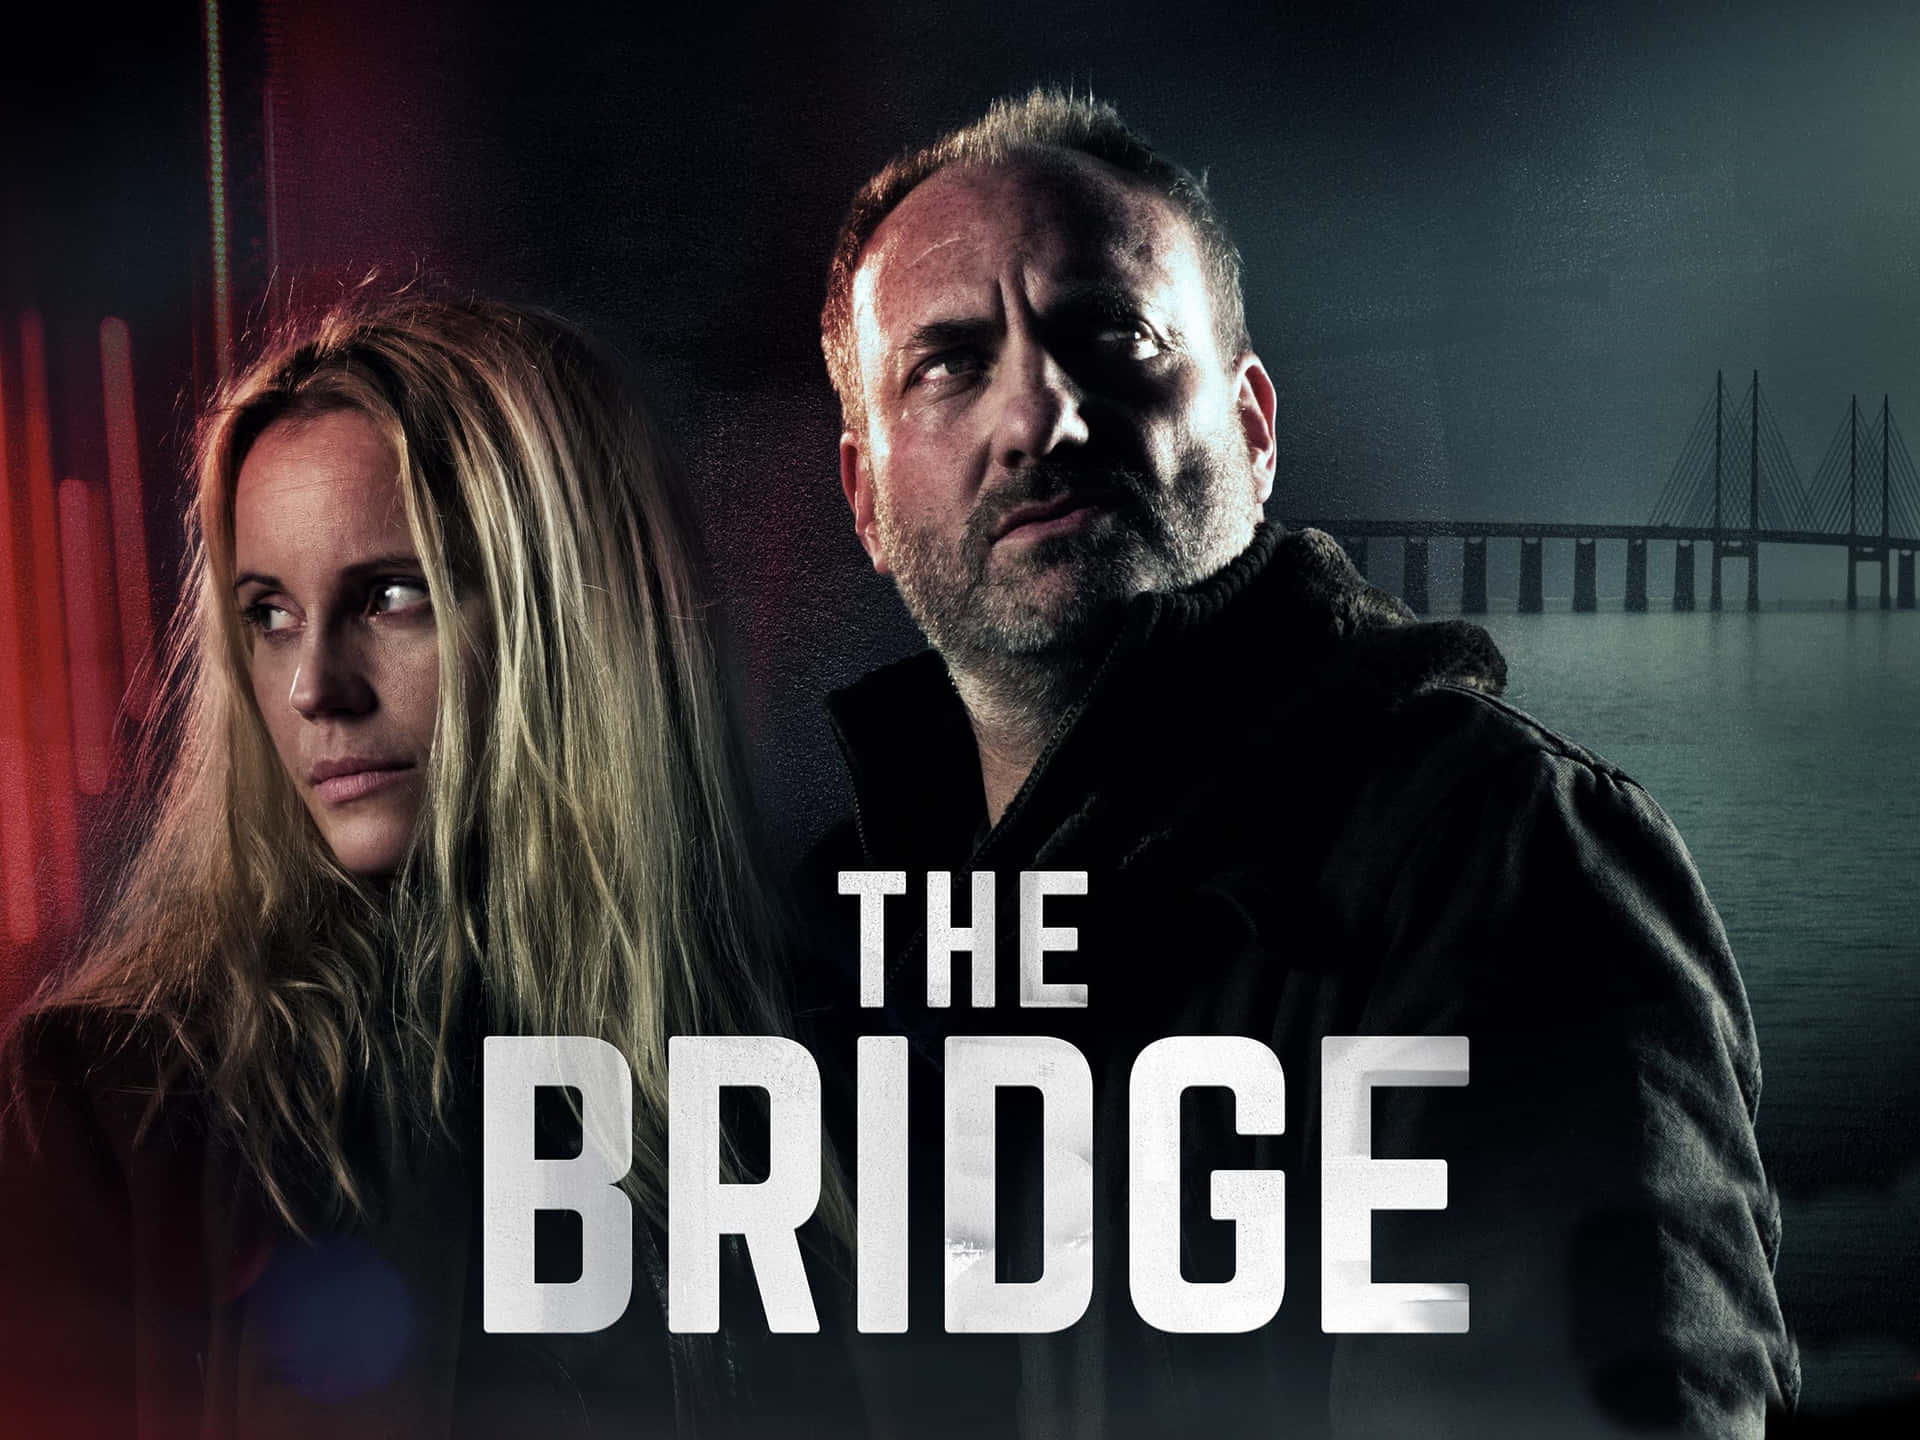 The Bridge Tv Series Poster, Featuring The Main Characters And Iconic Bridge Backdrop Wallpaper